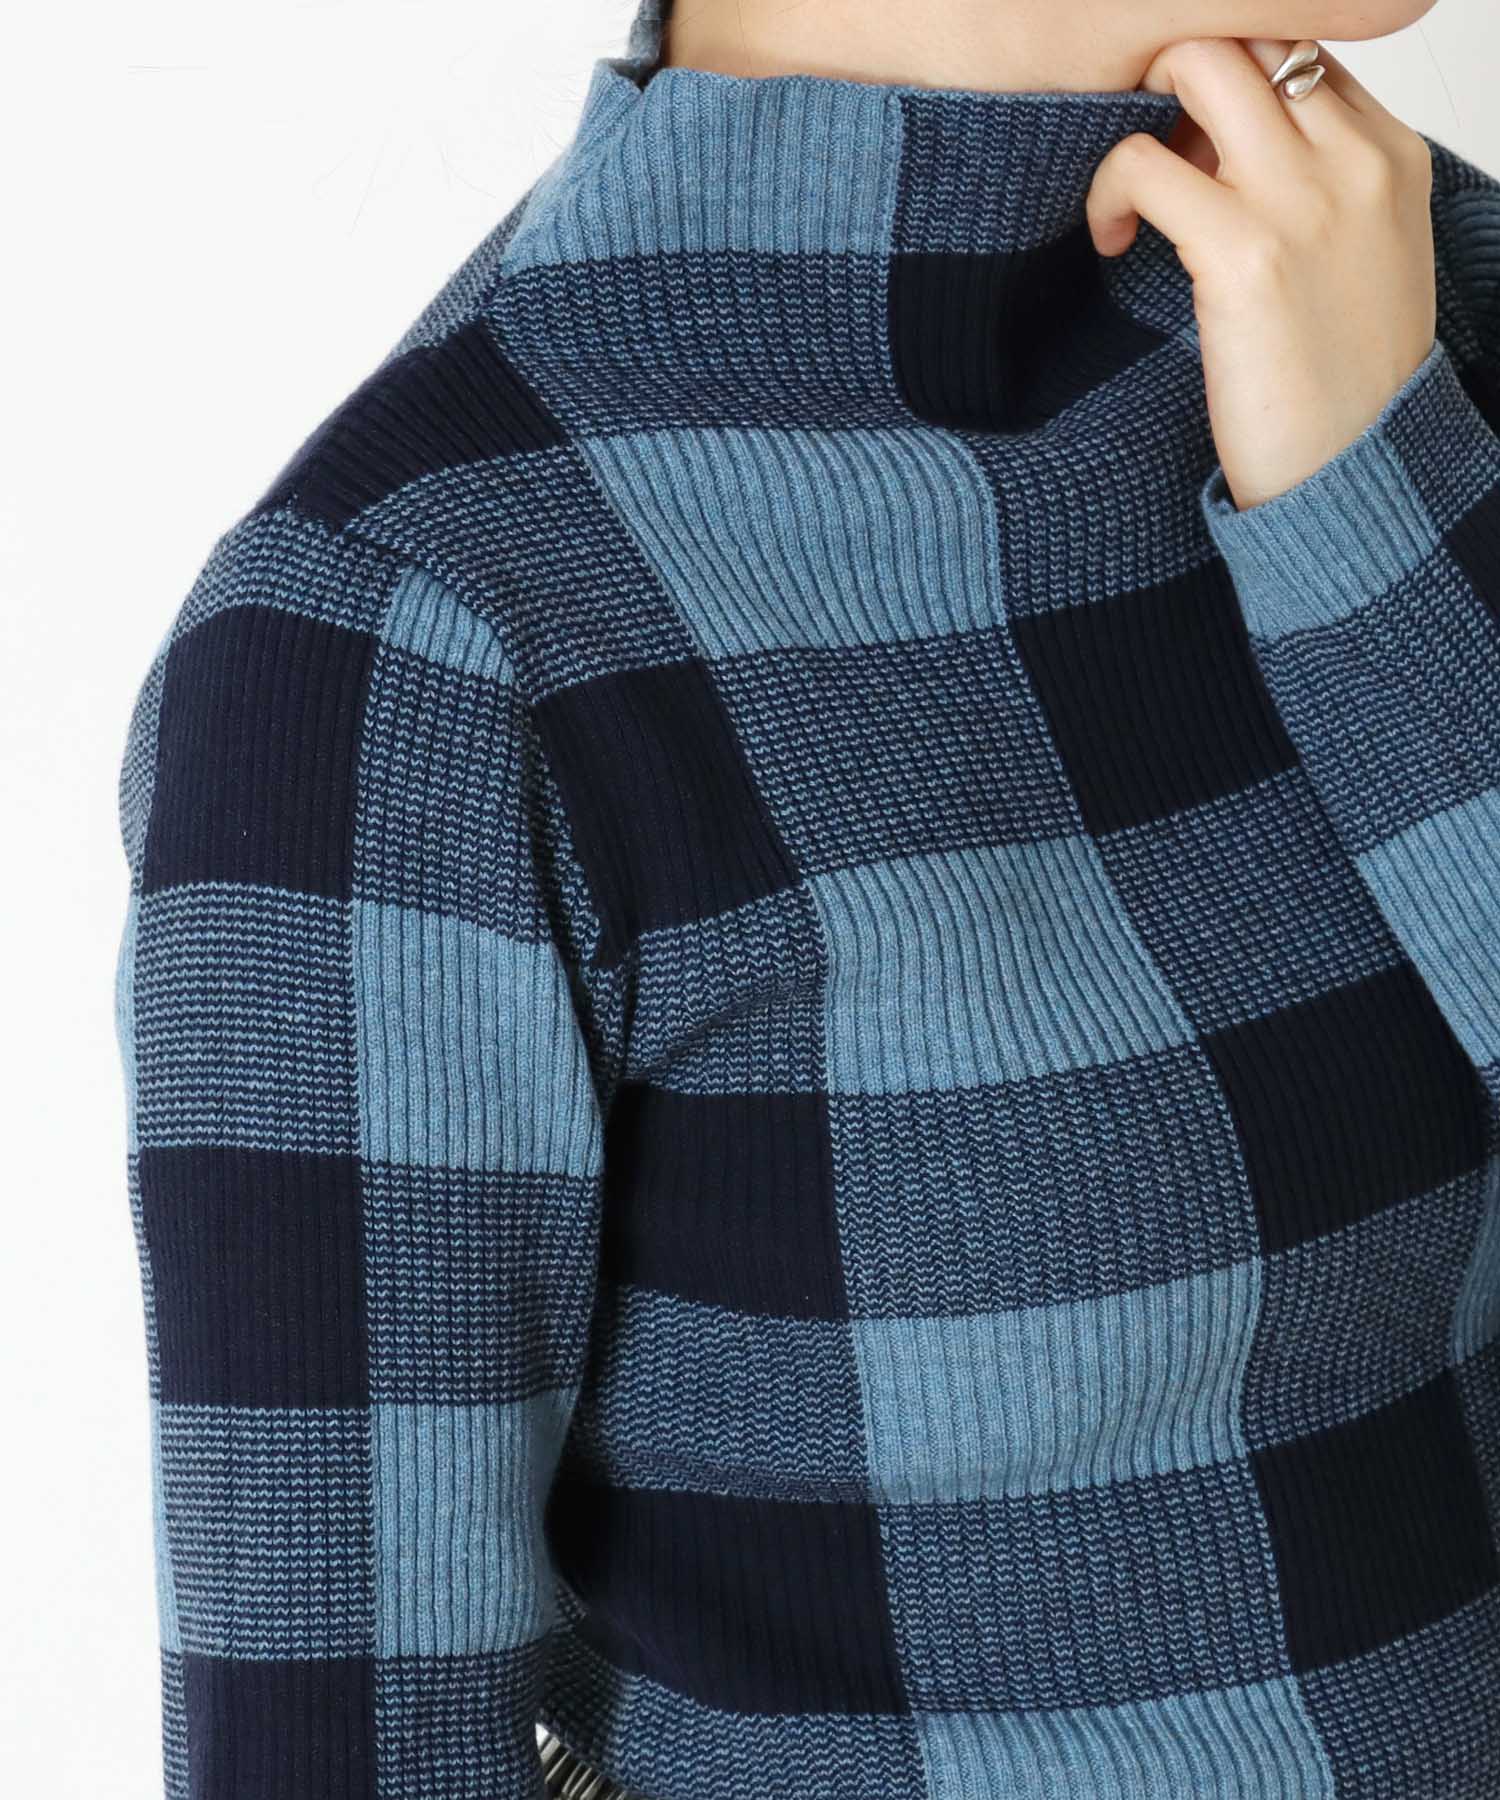 【WEB LIMITED】check high neck knit